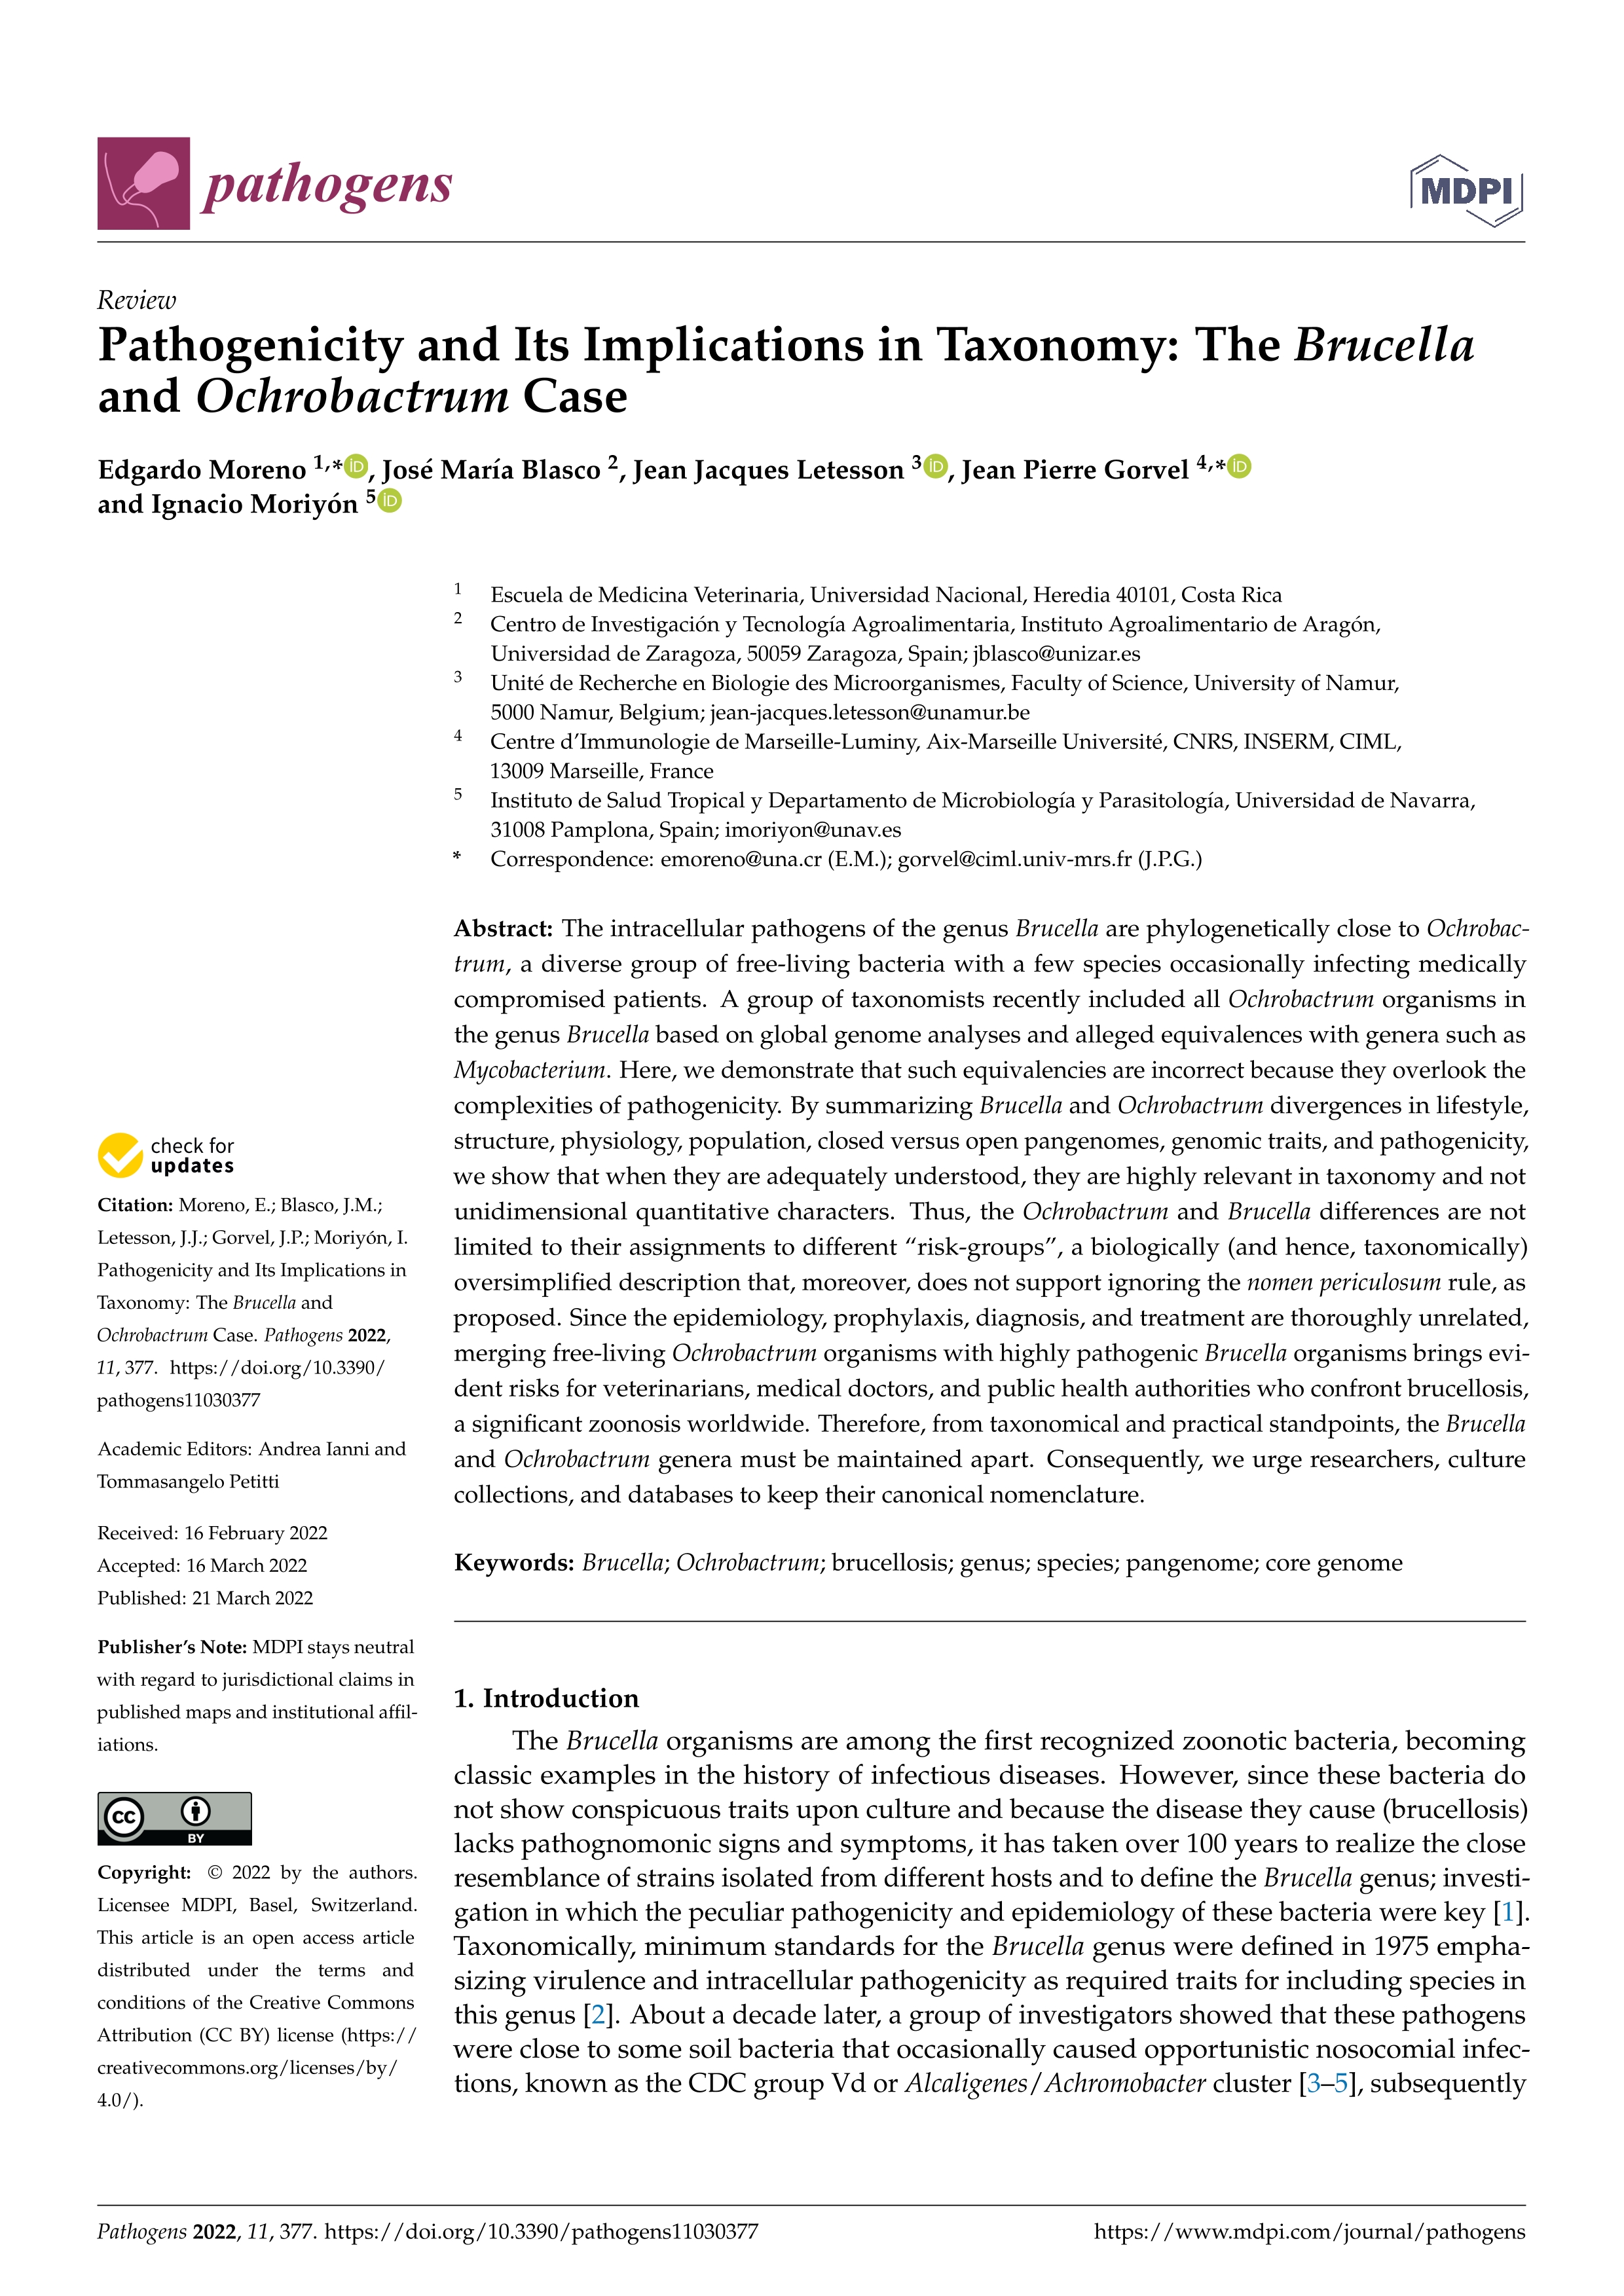 Pathogenicity and Its Implications in Taxonomy: The Brucella and Ochrobactrum Case